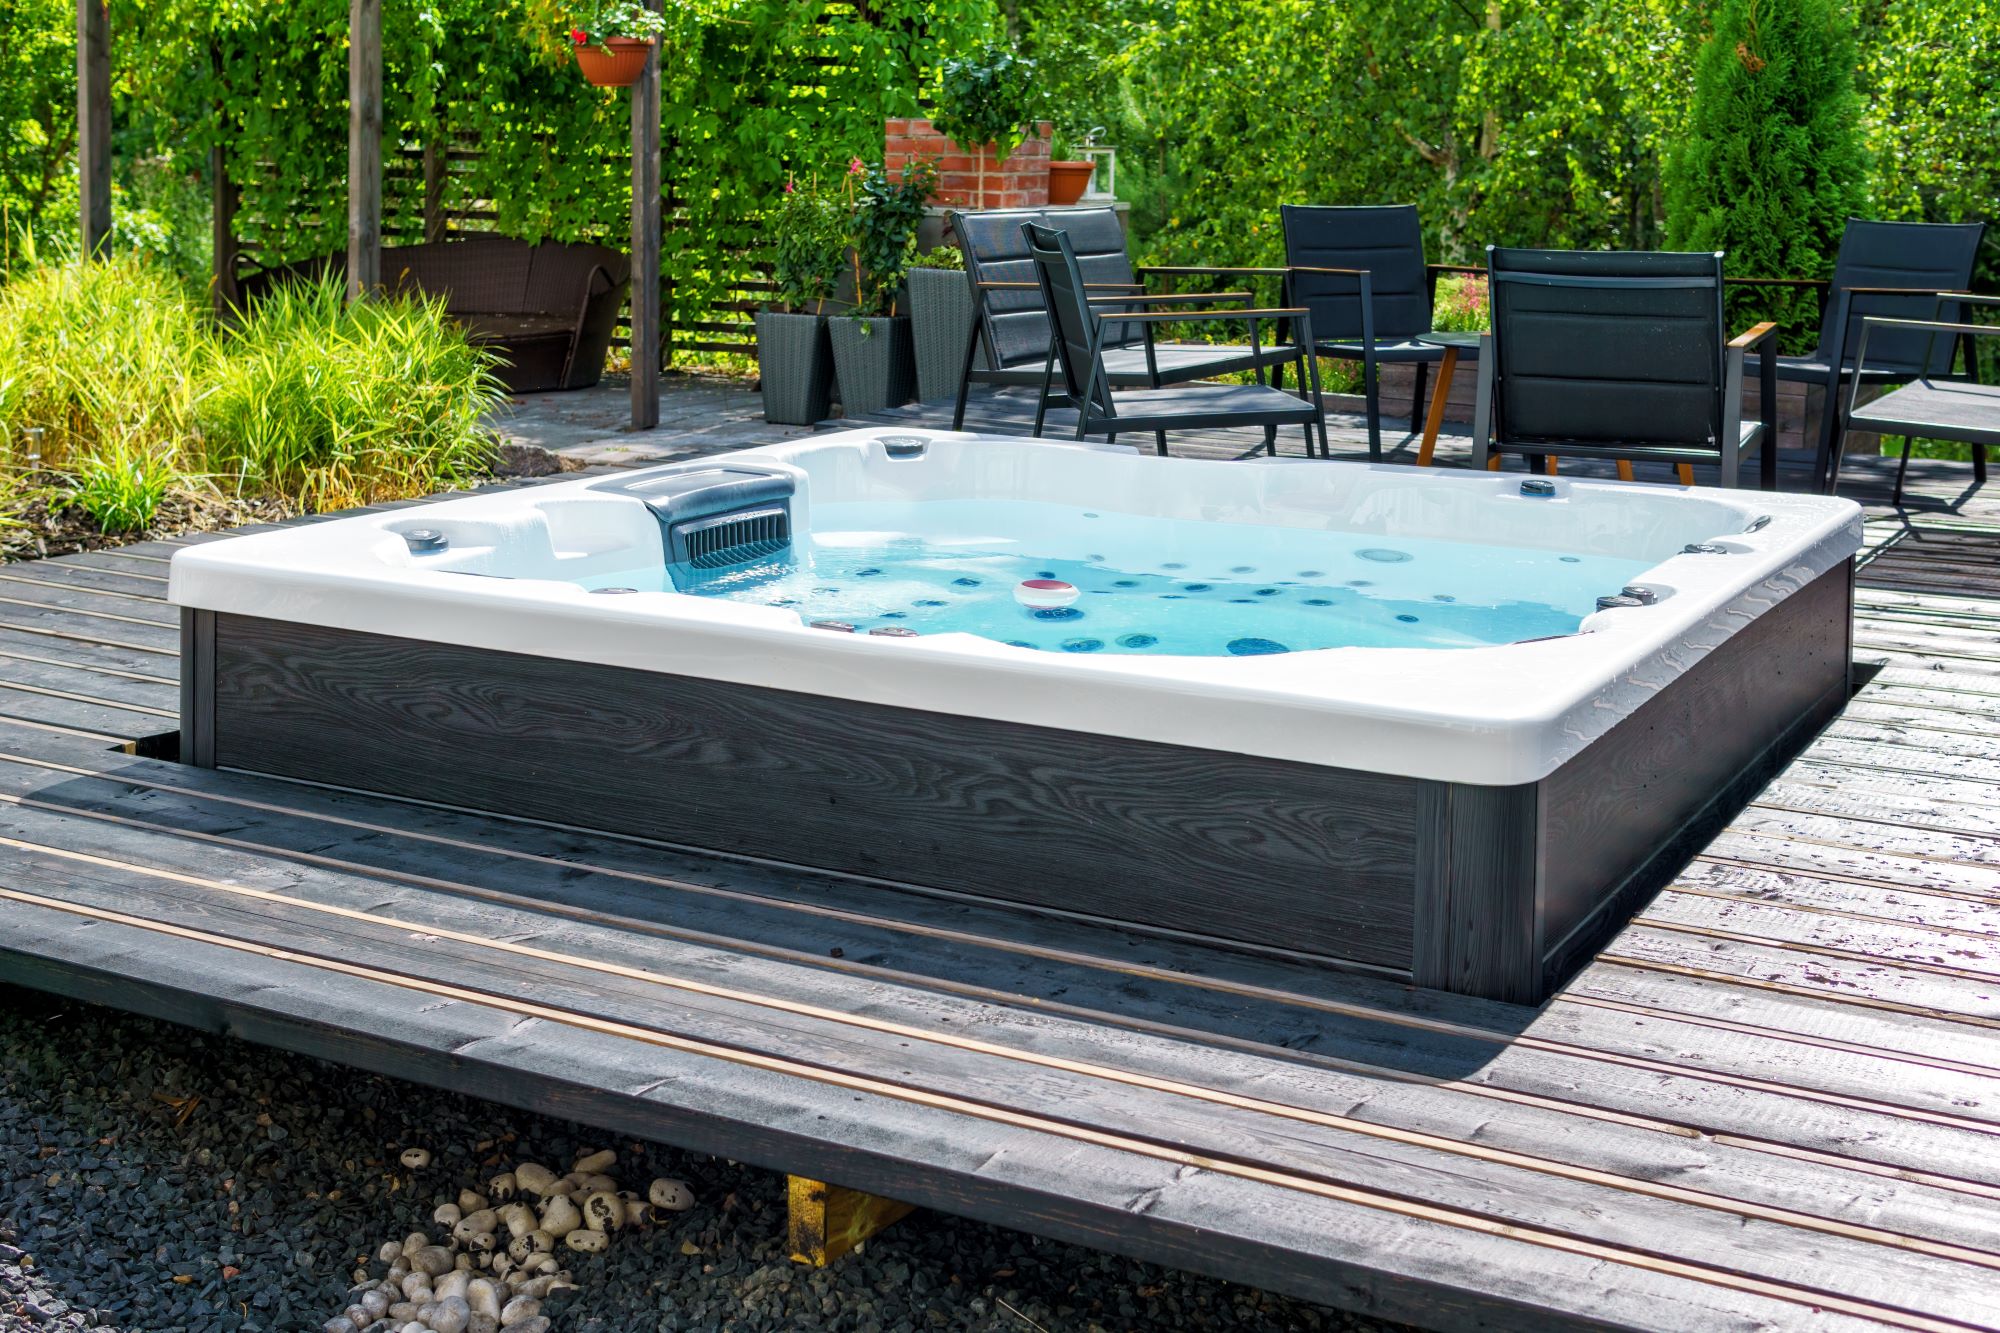 5 Things To Consider Before Buying A Hot Tub